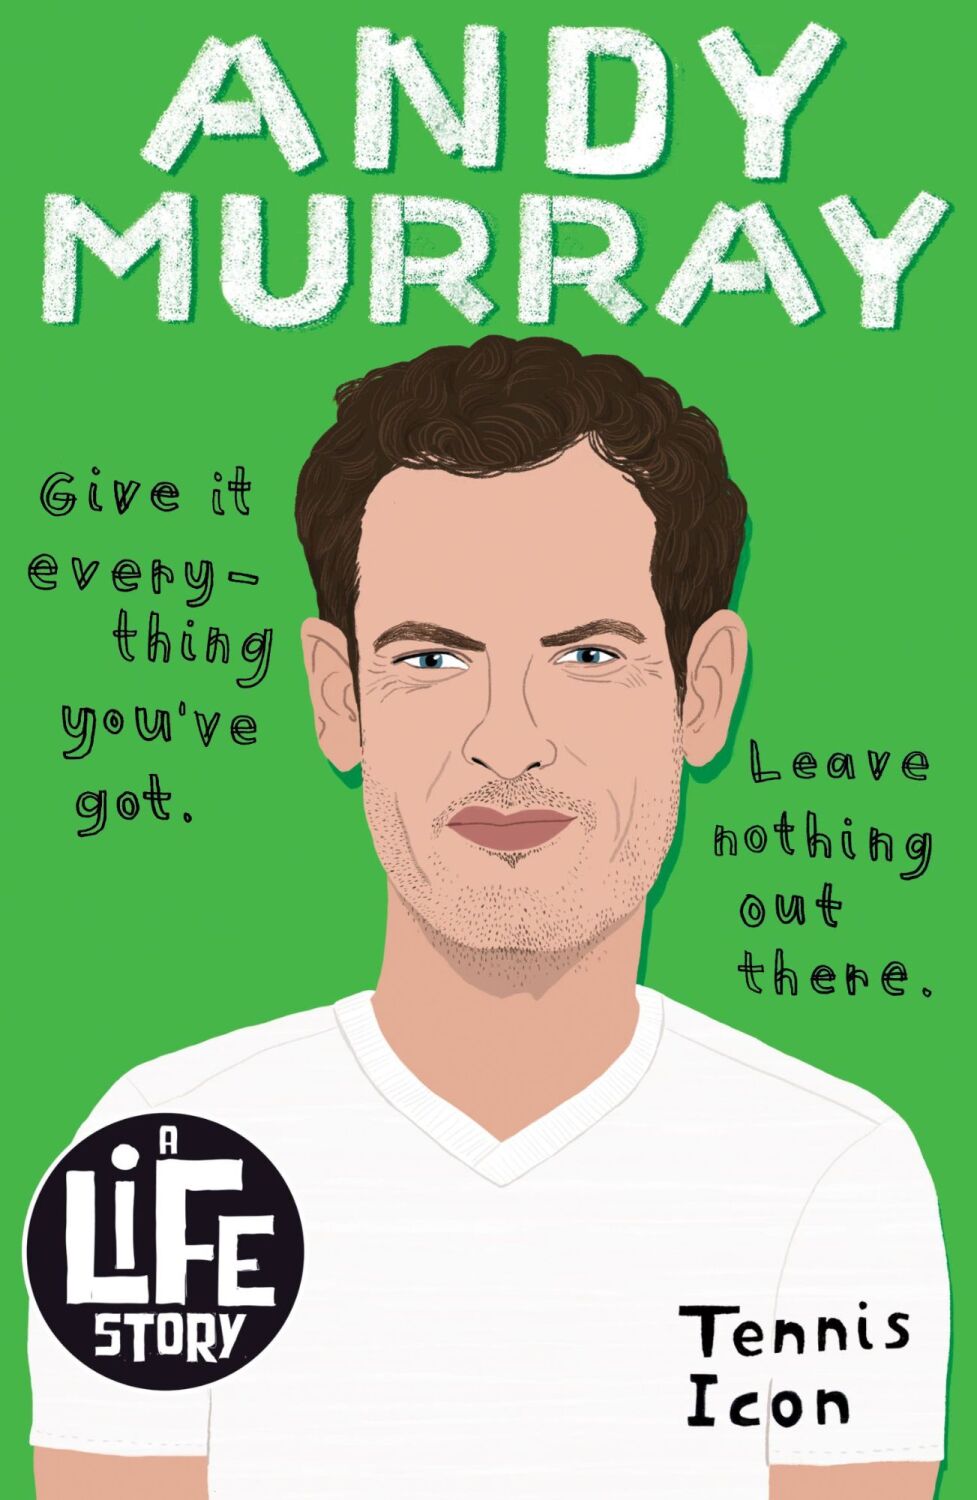 Life Story - Andy Murray